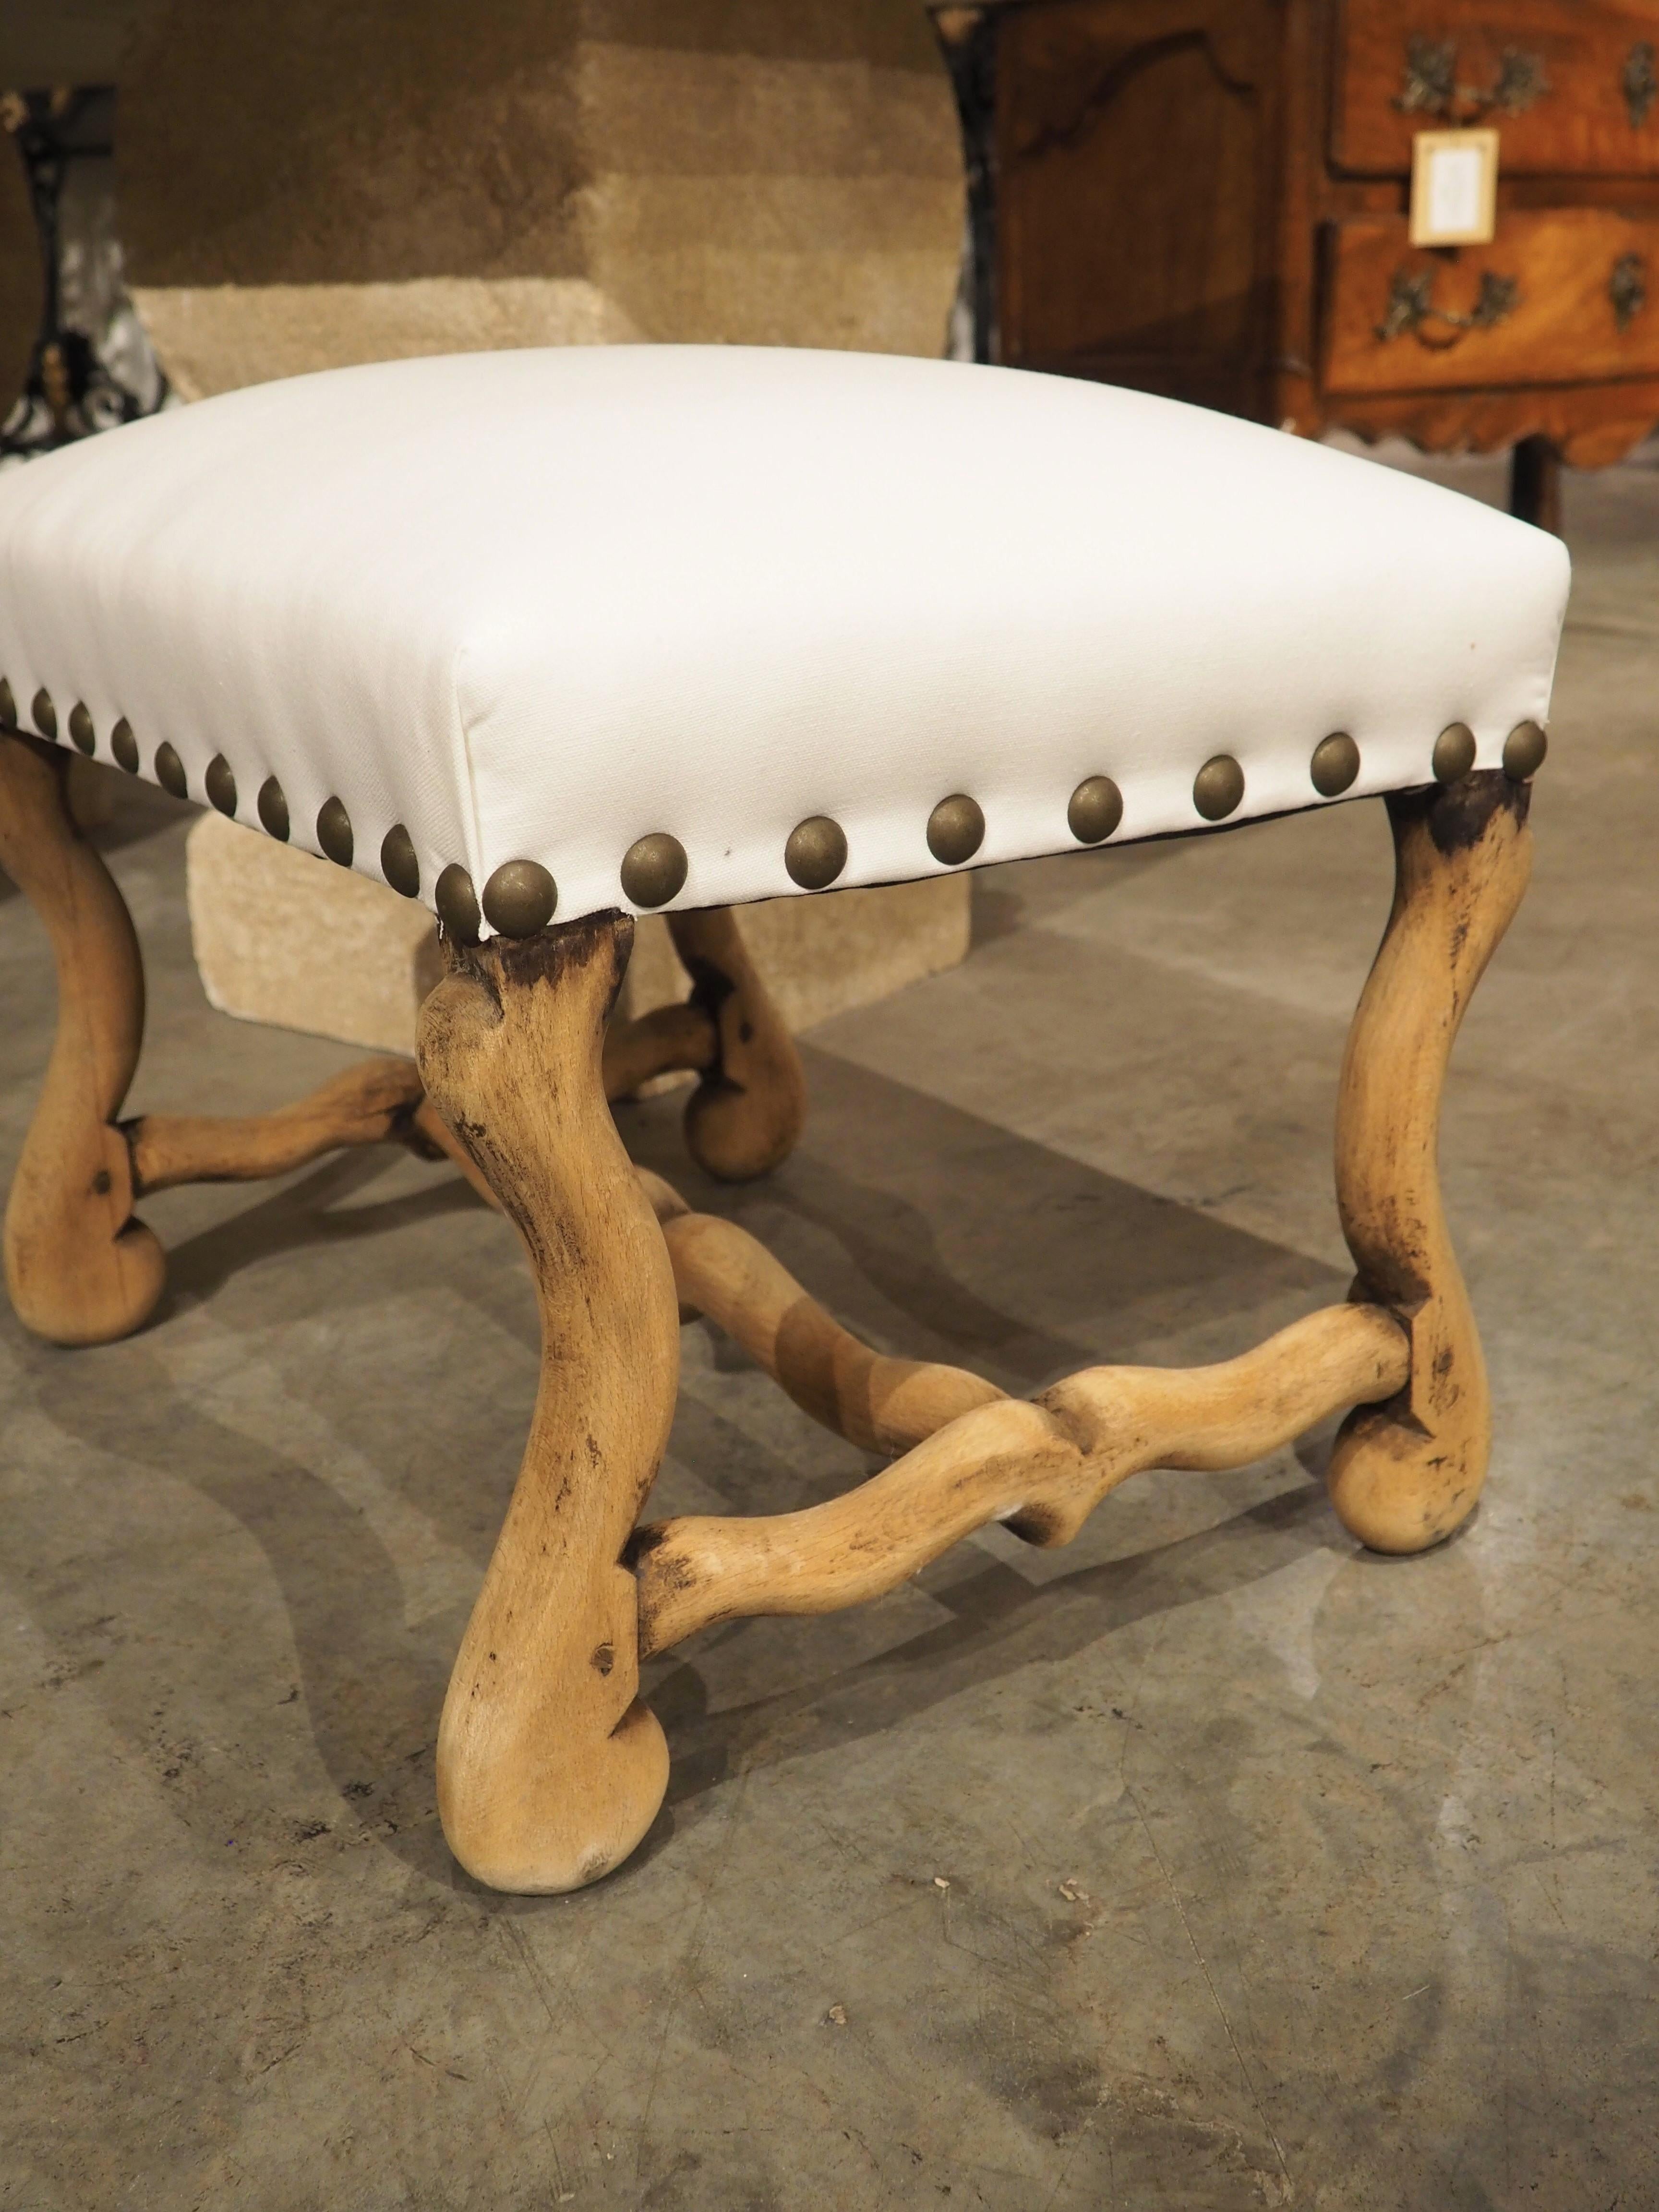 Bleached French Os De Mouton Tabouret Stool, White Cotton Upholstery, C. 1900 For Sale 4